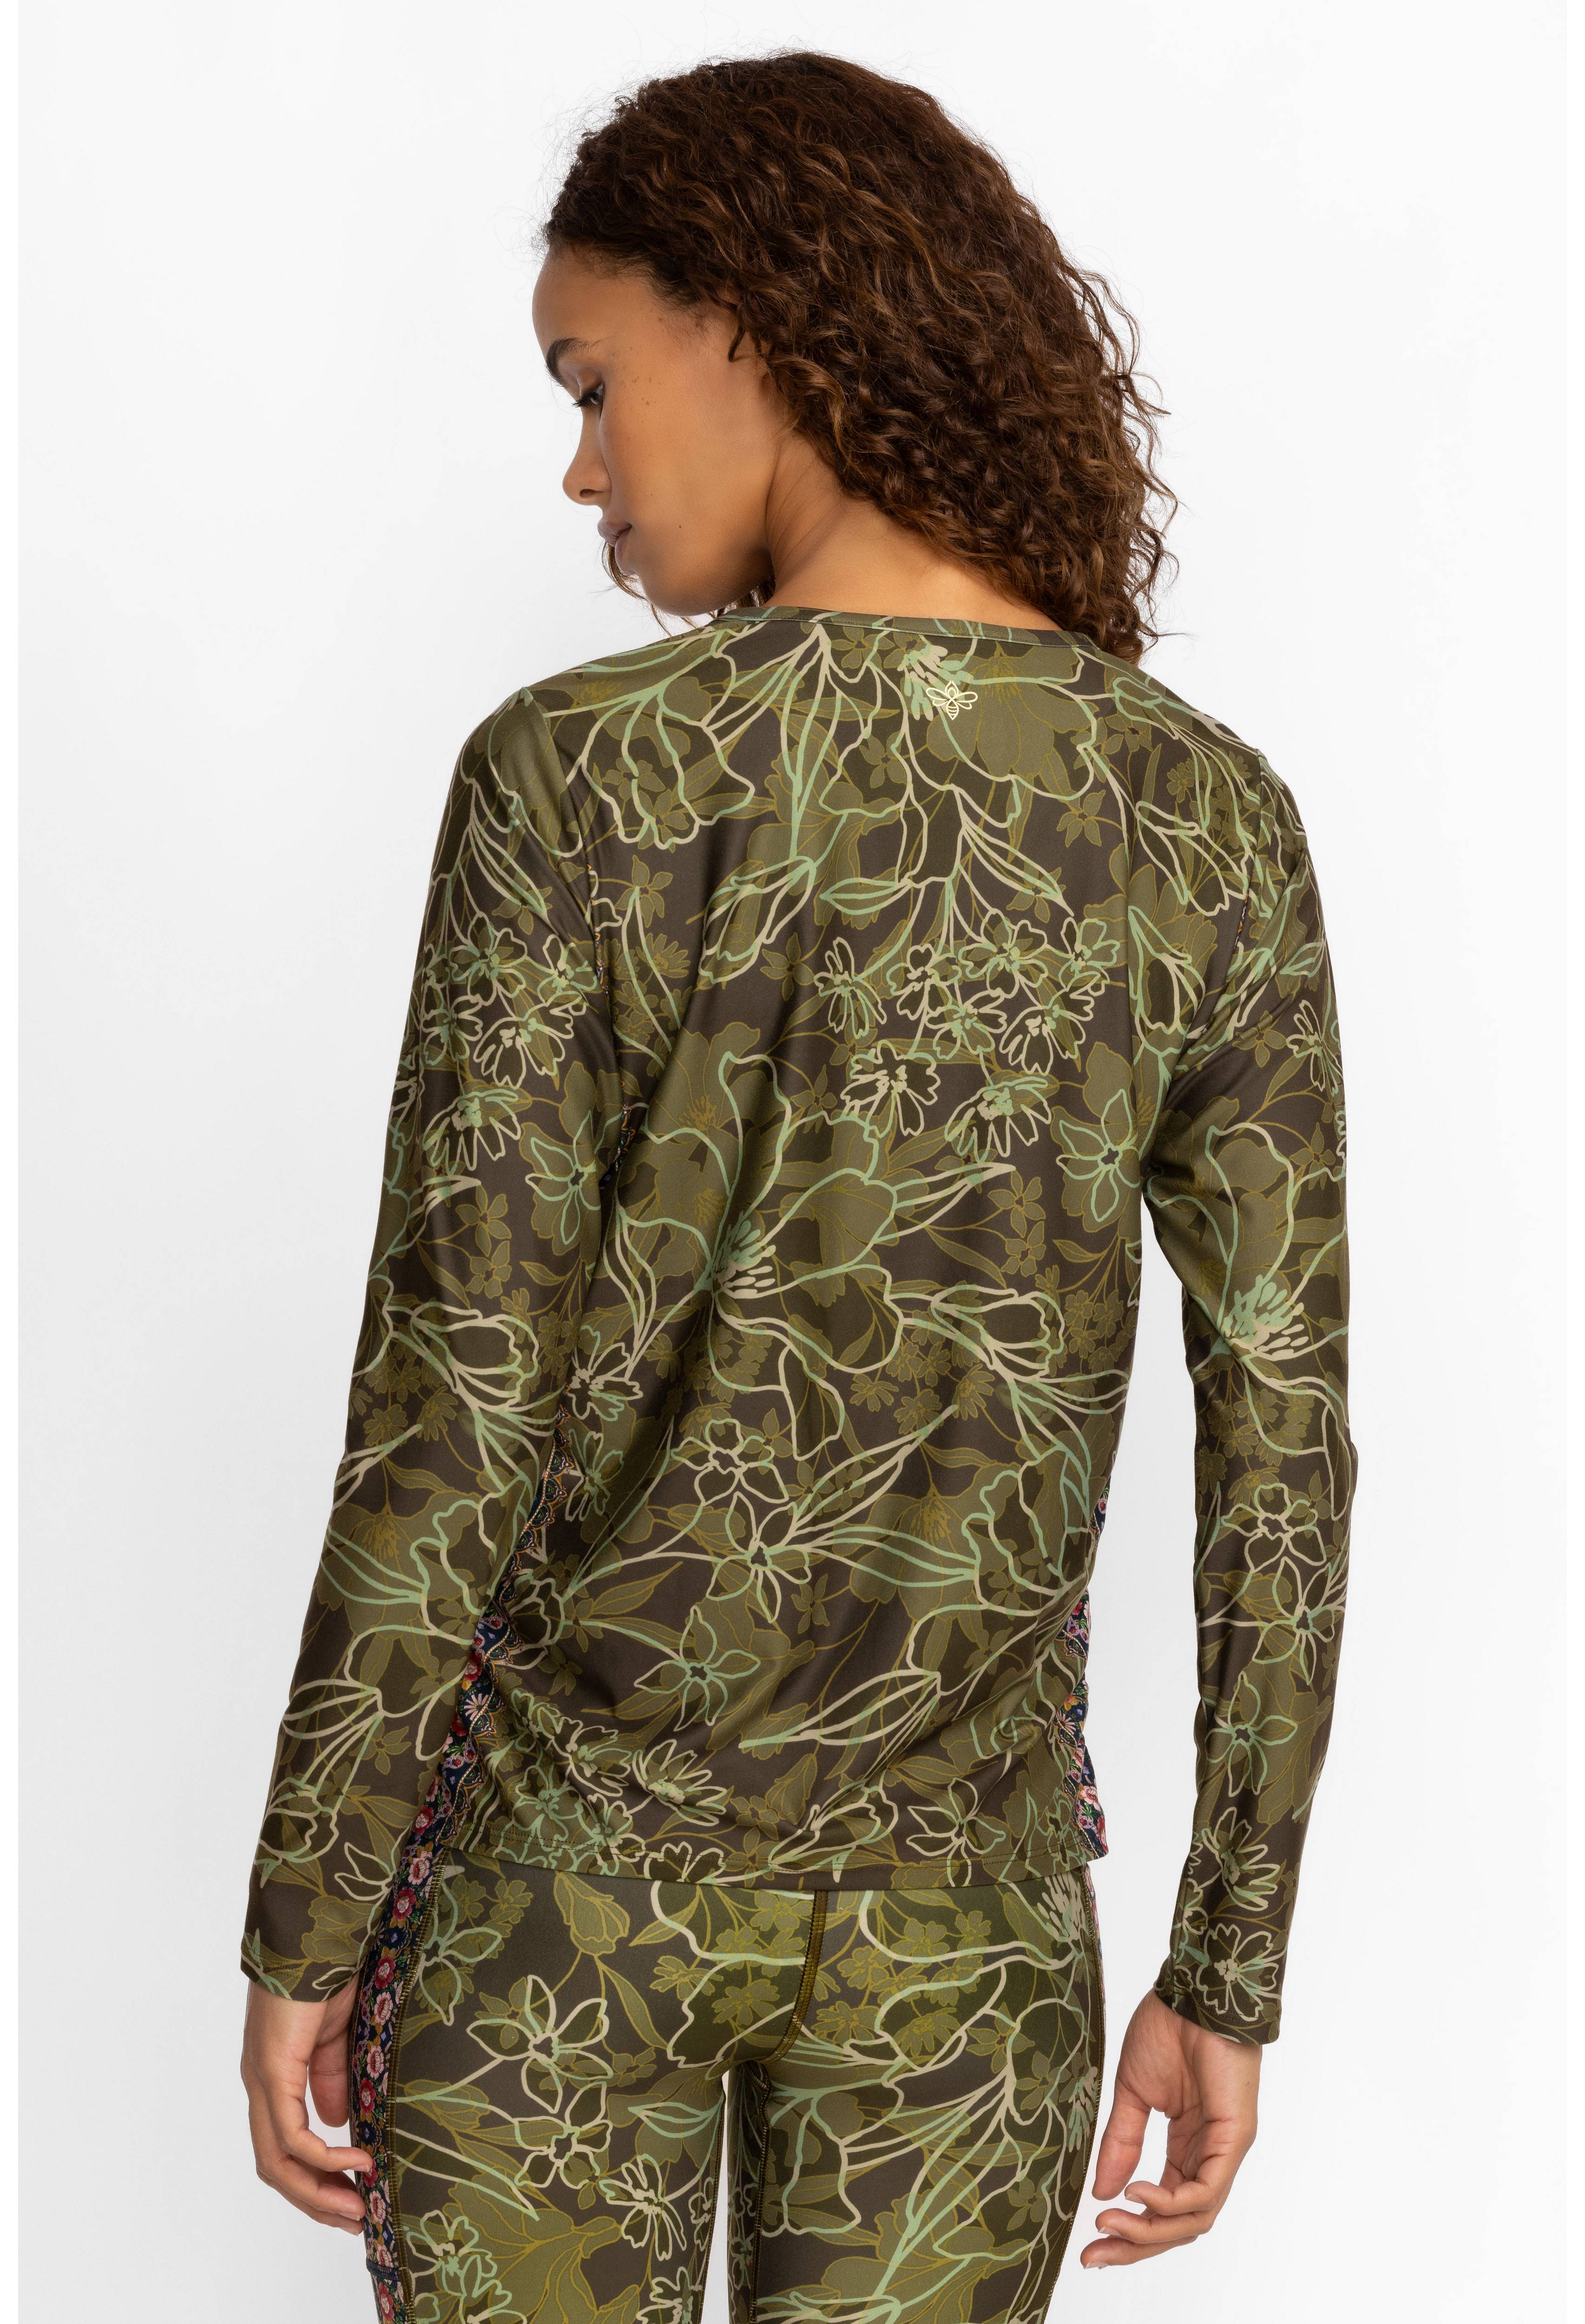 HIRZ CAMO RUCHED LONG SLEEVE TOP, , large image number 4